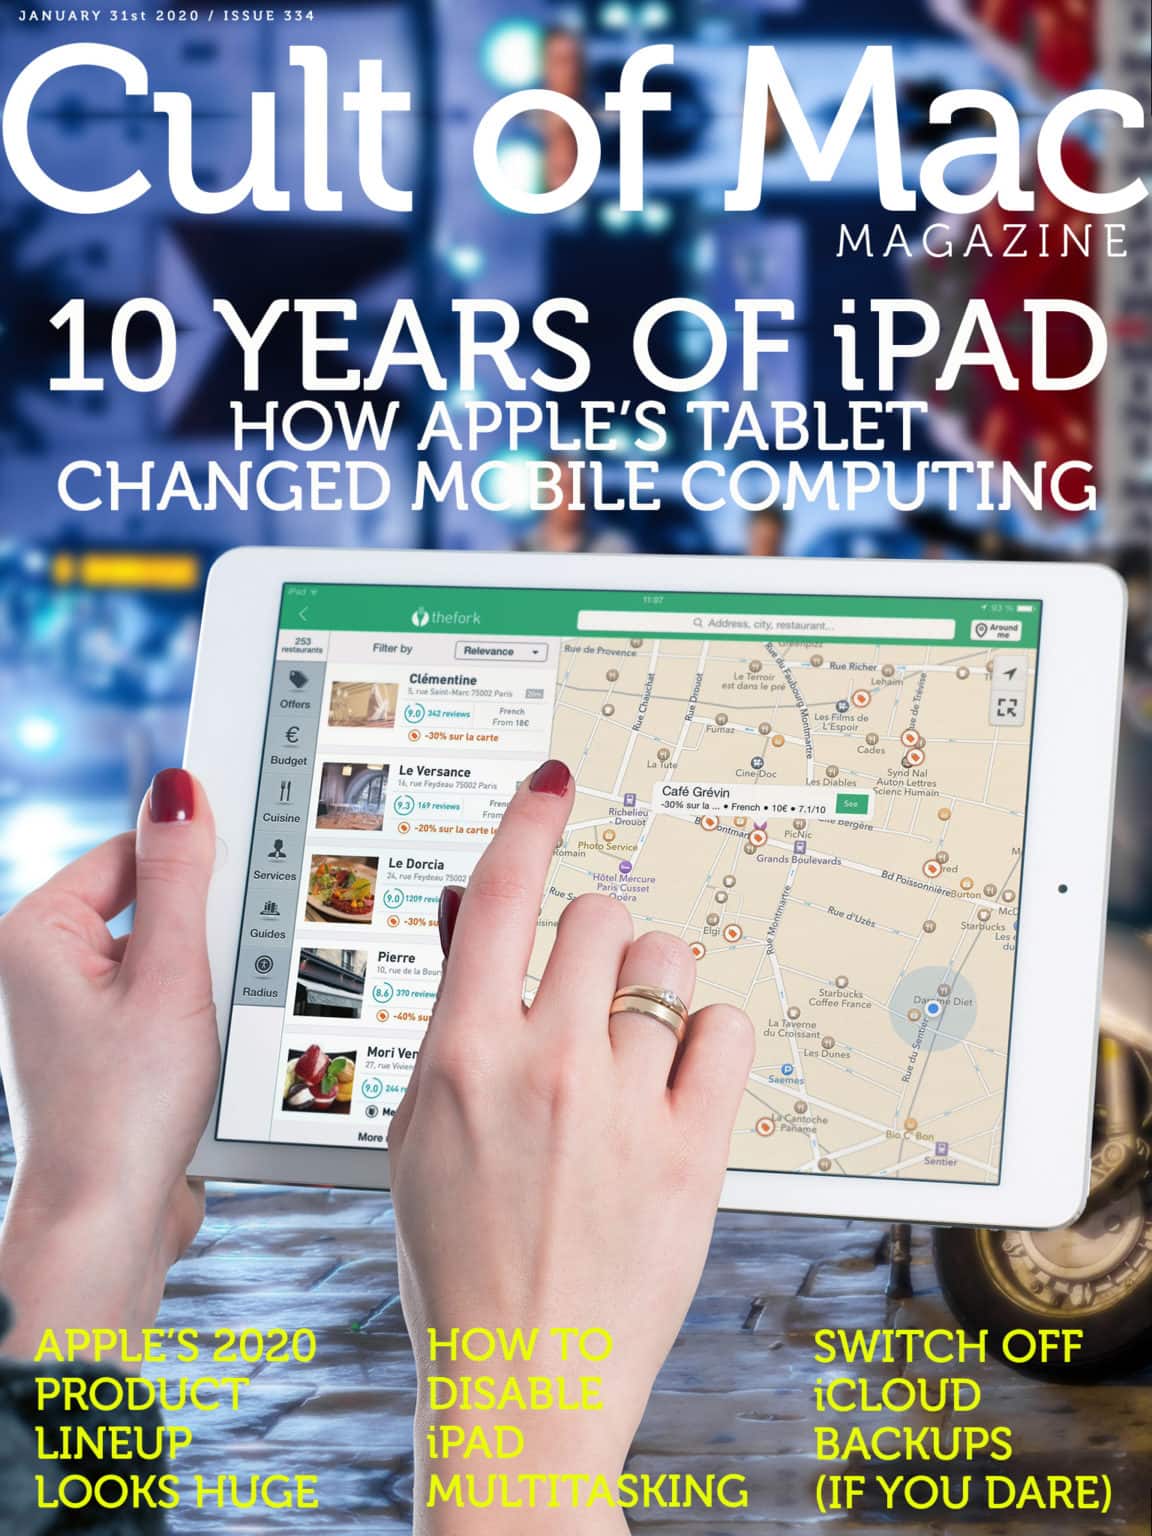 10 years of iPad: How Apple's tablet changed mobile computing.